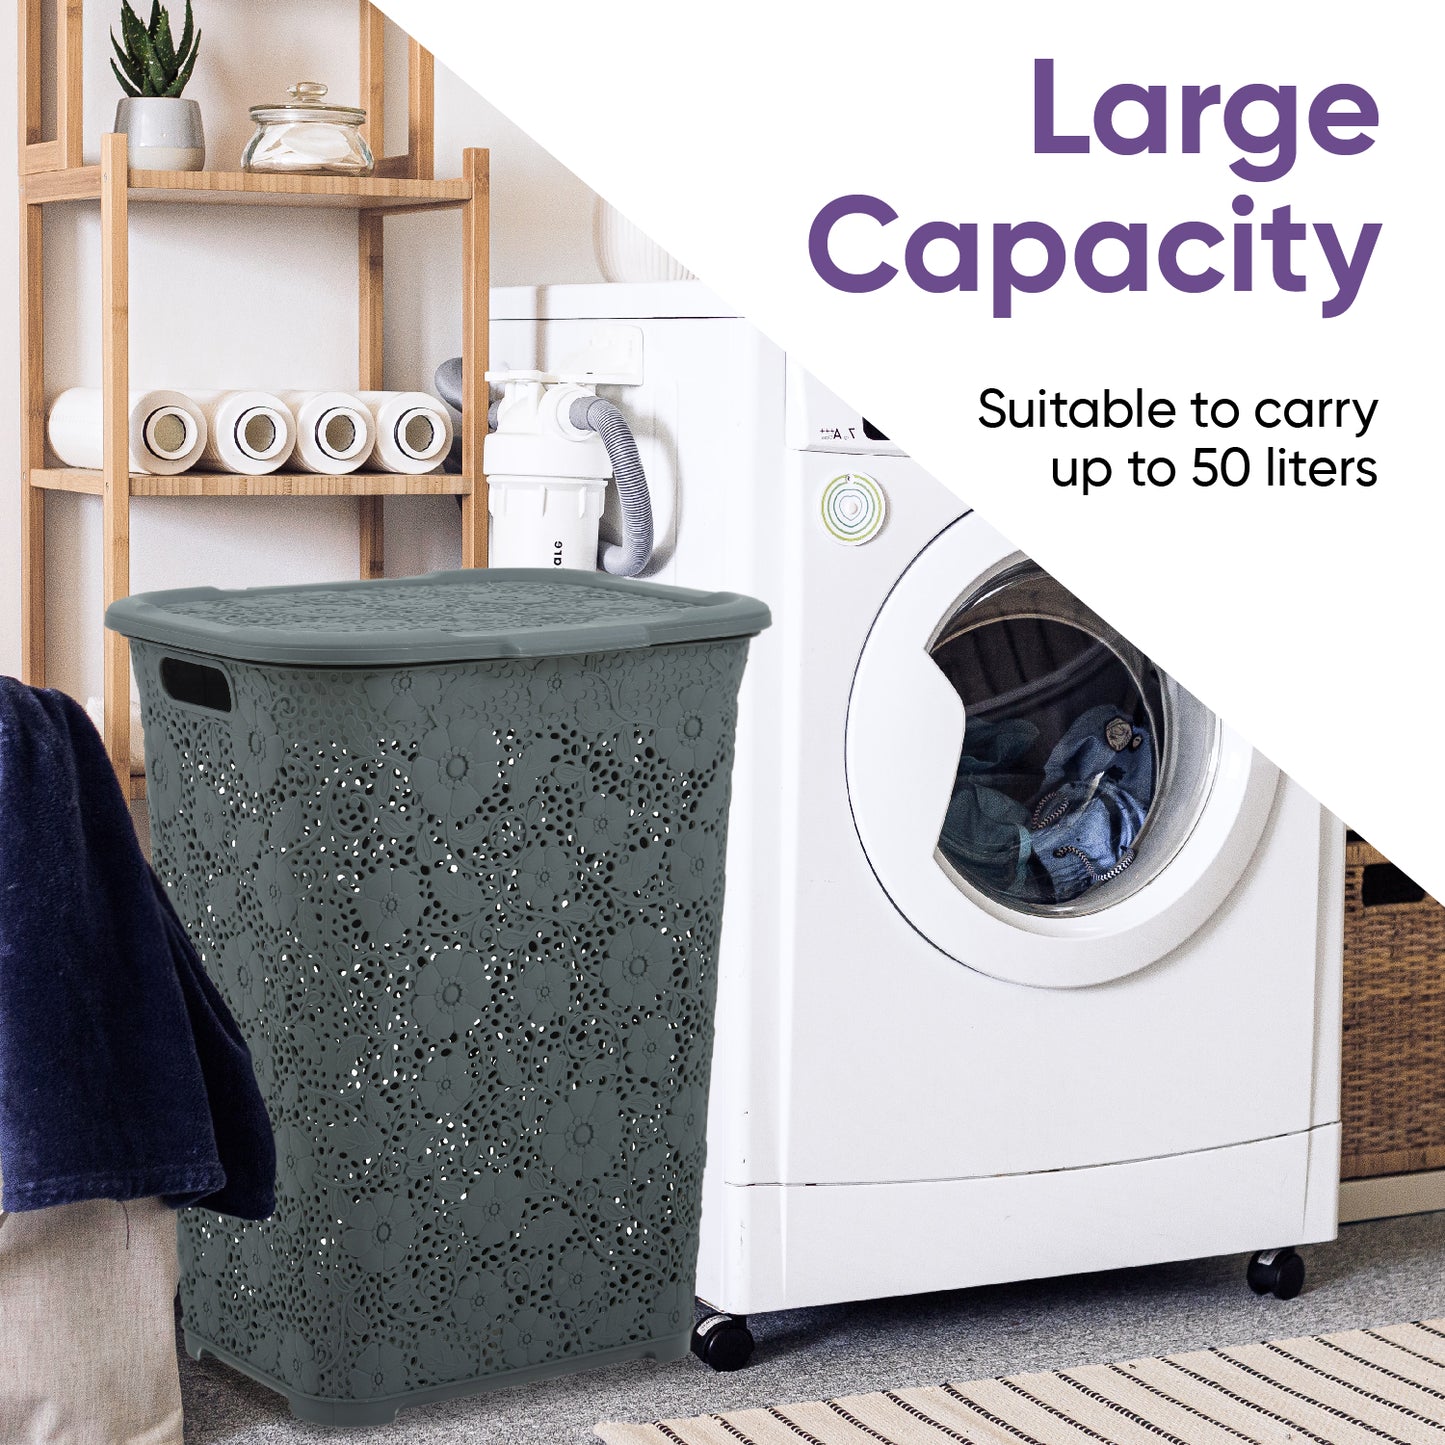 50 Liter Knit Style Laundry Hamper with Cutout Handles - Onyx Grey